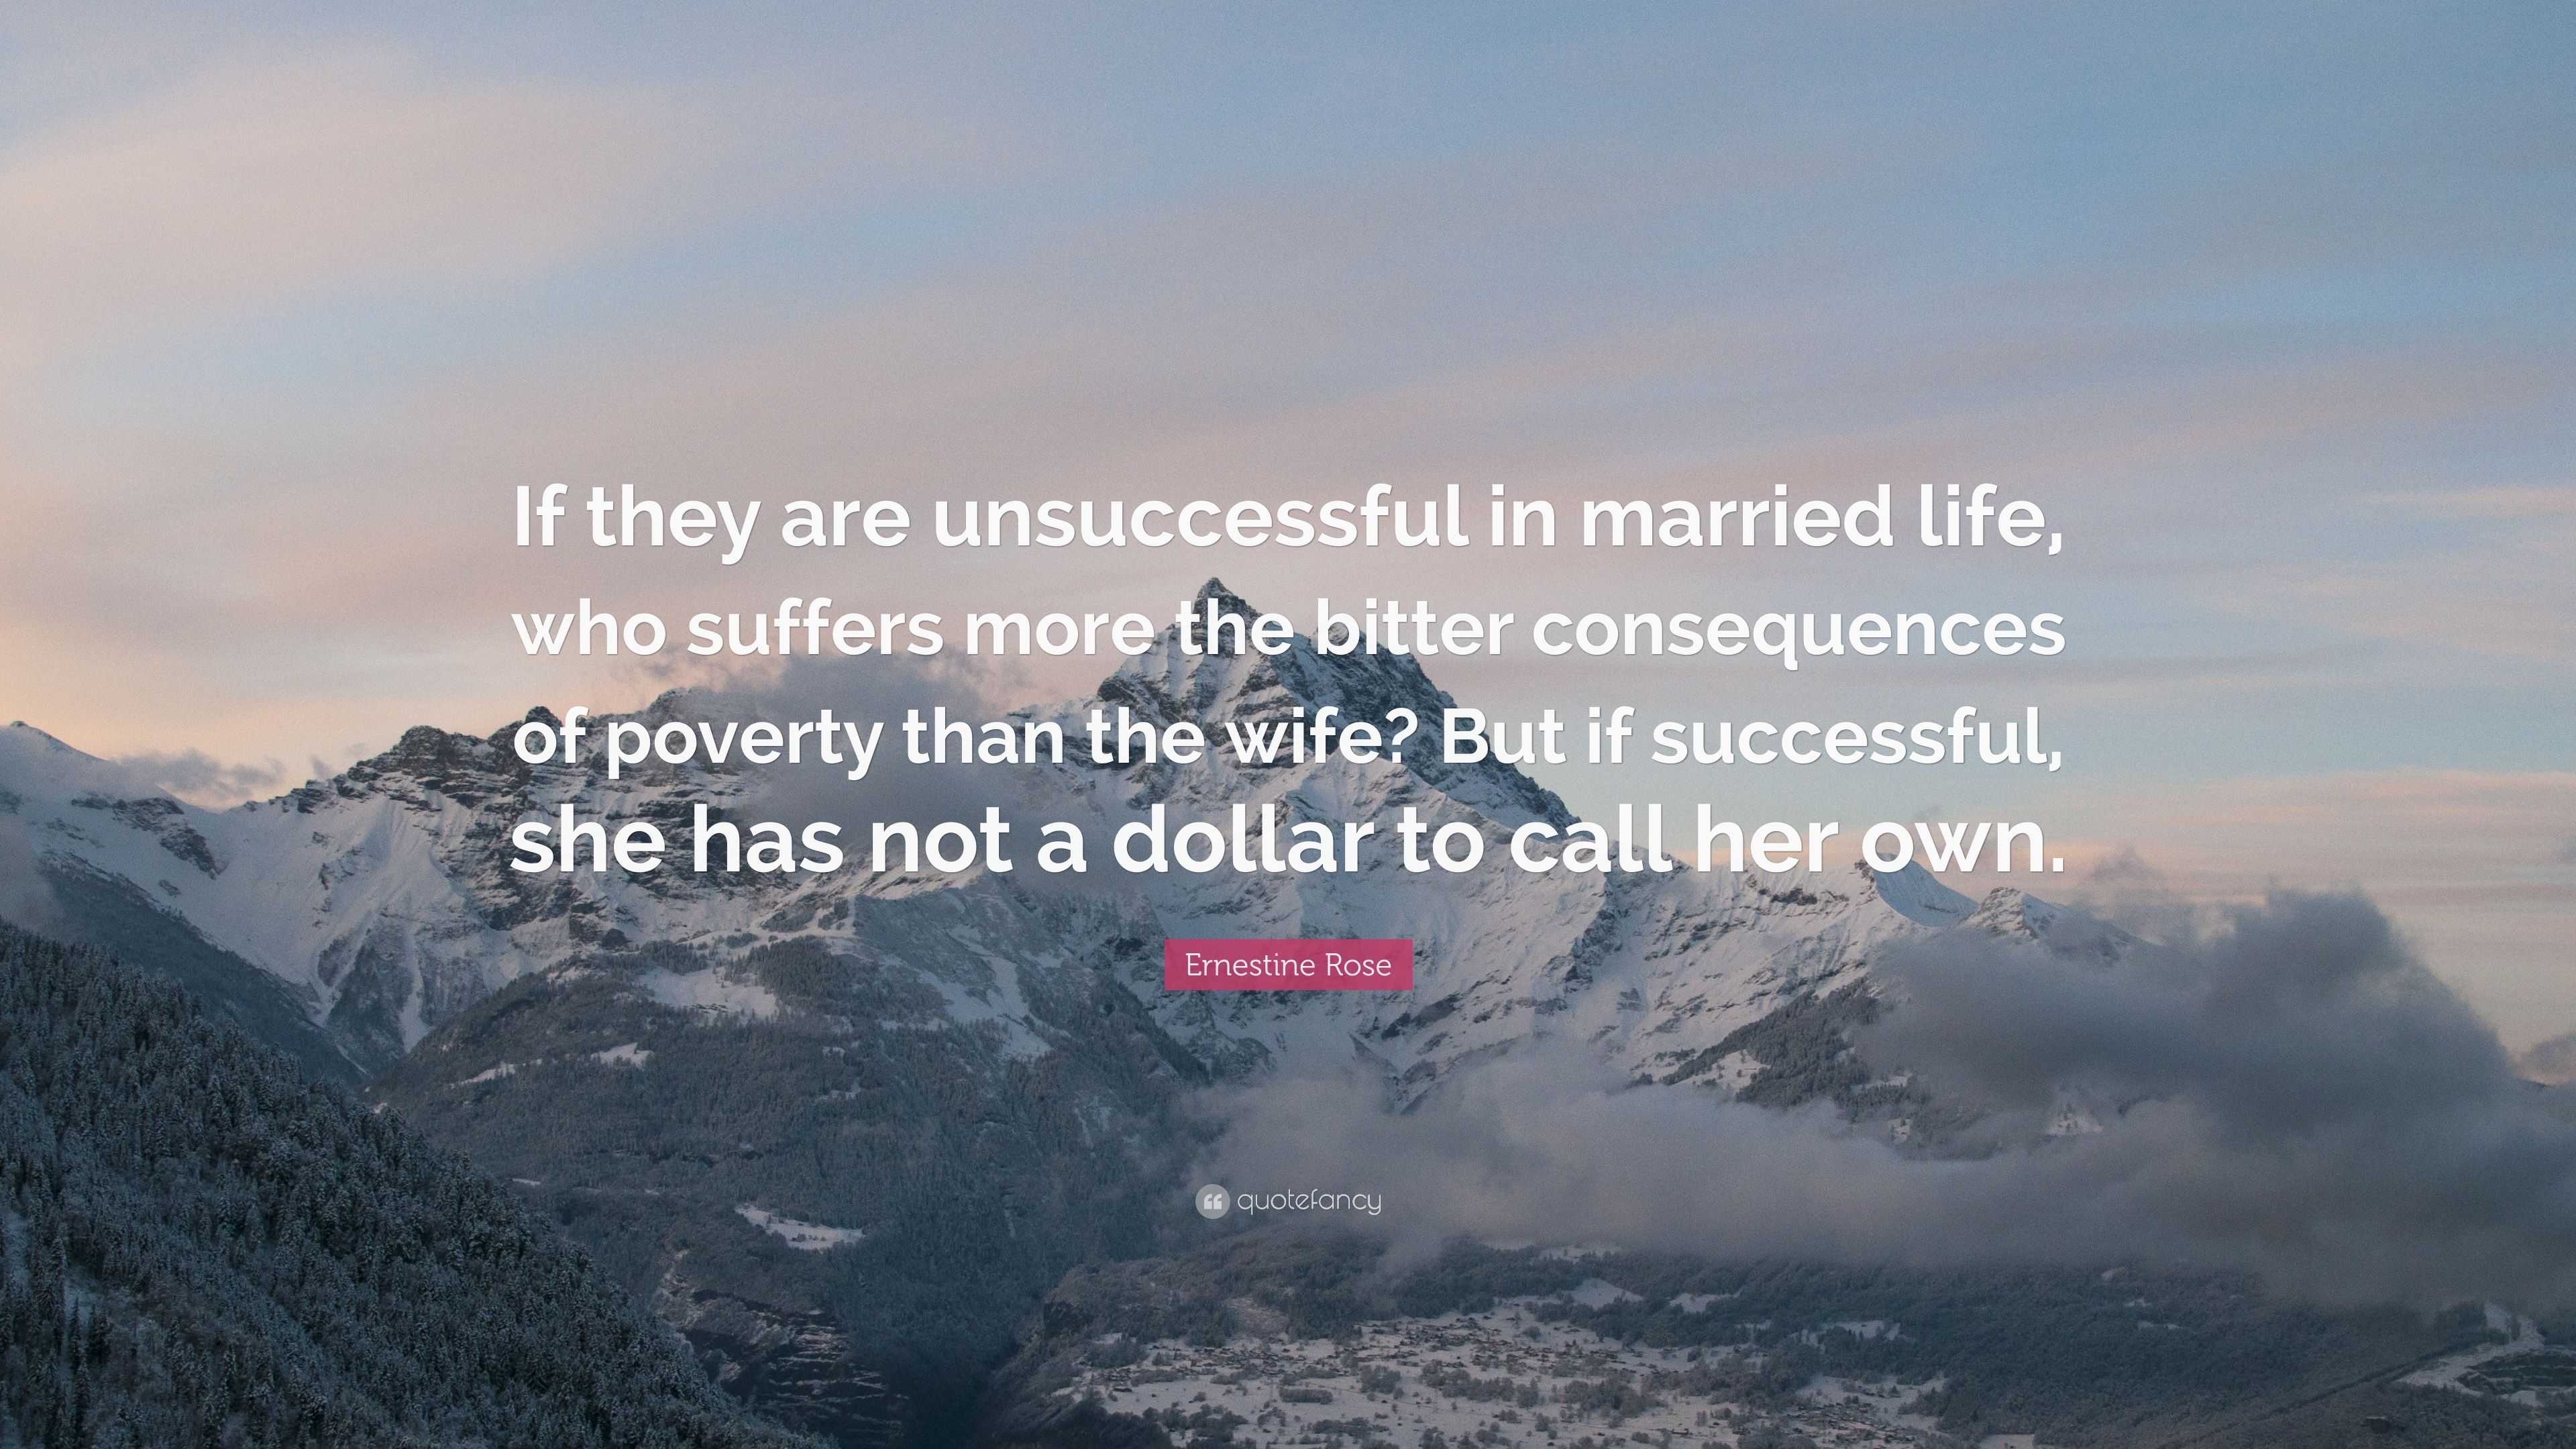 Ernestine Rose Quote: “If they are unsuccessful in married life, who ...